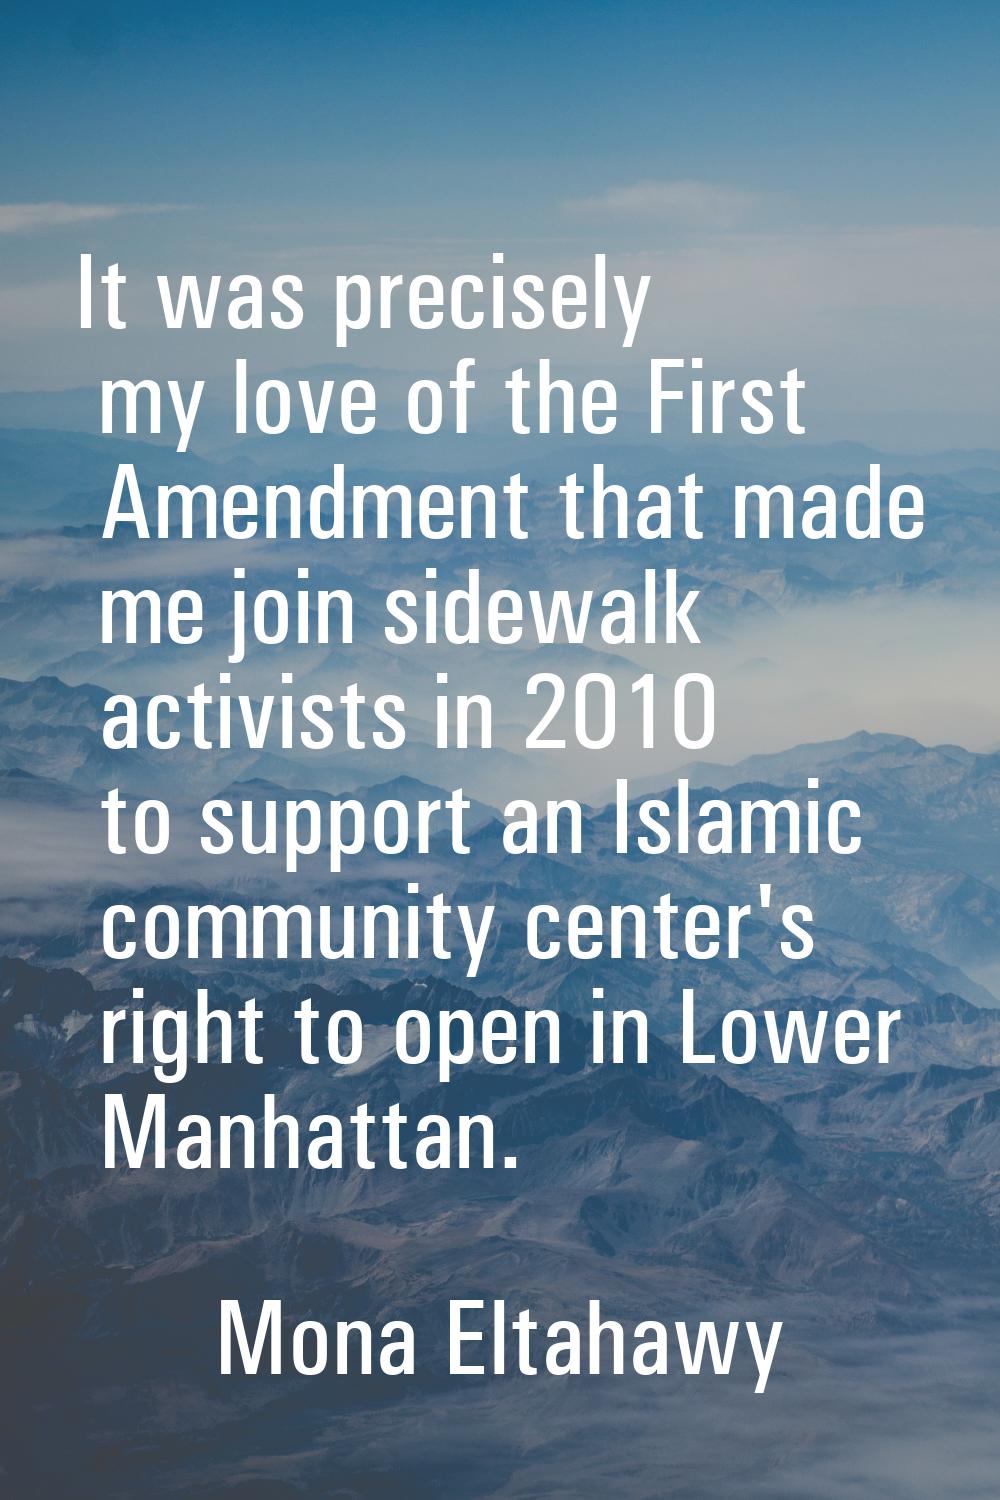 It was precisely my love of the First Amendment that made me join sidewalk activists in 2010 to sup